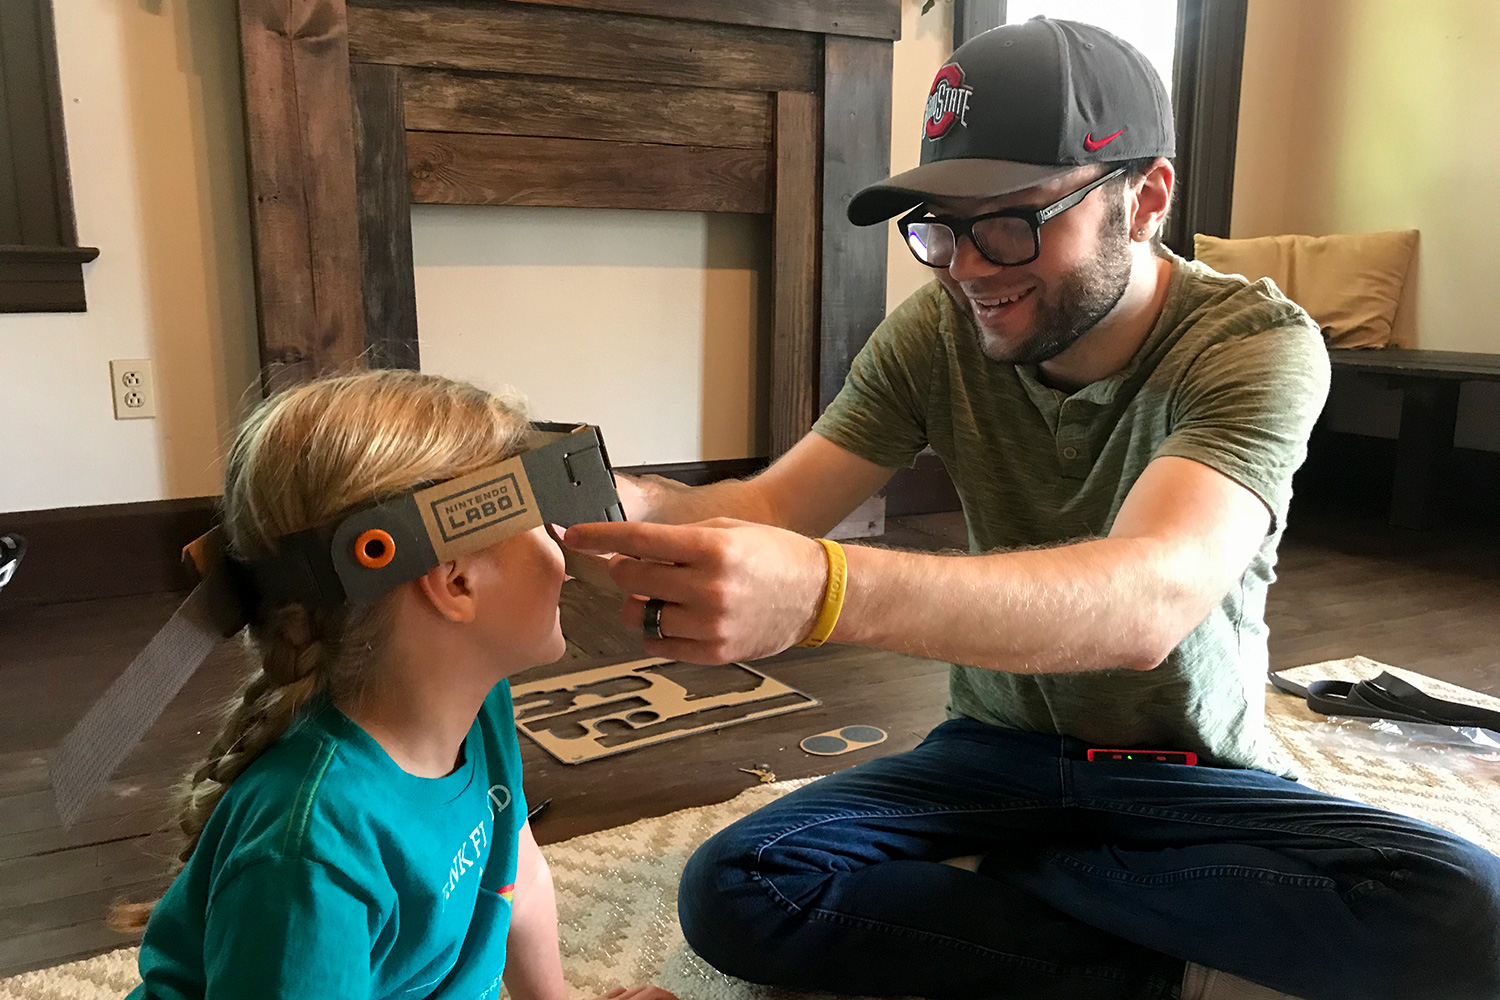 nintendo labo robot kit product experience review putting mask on